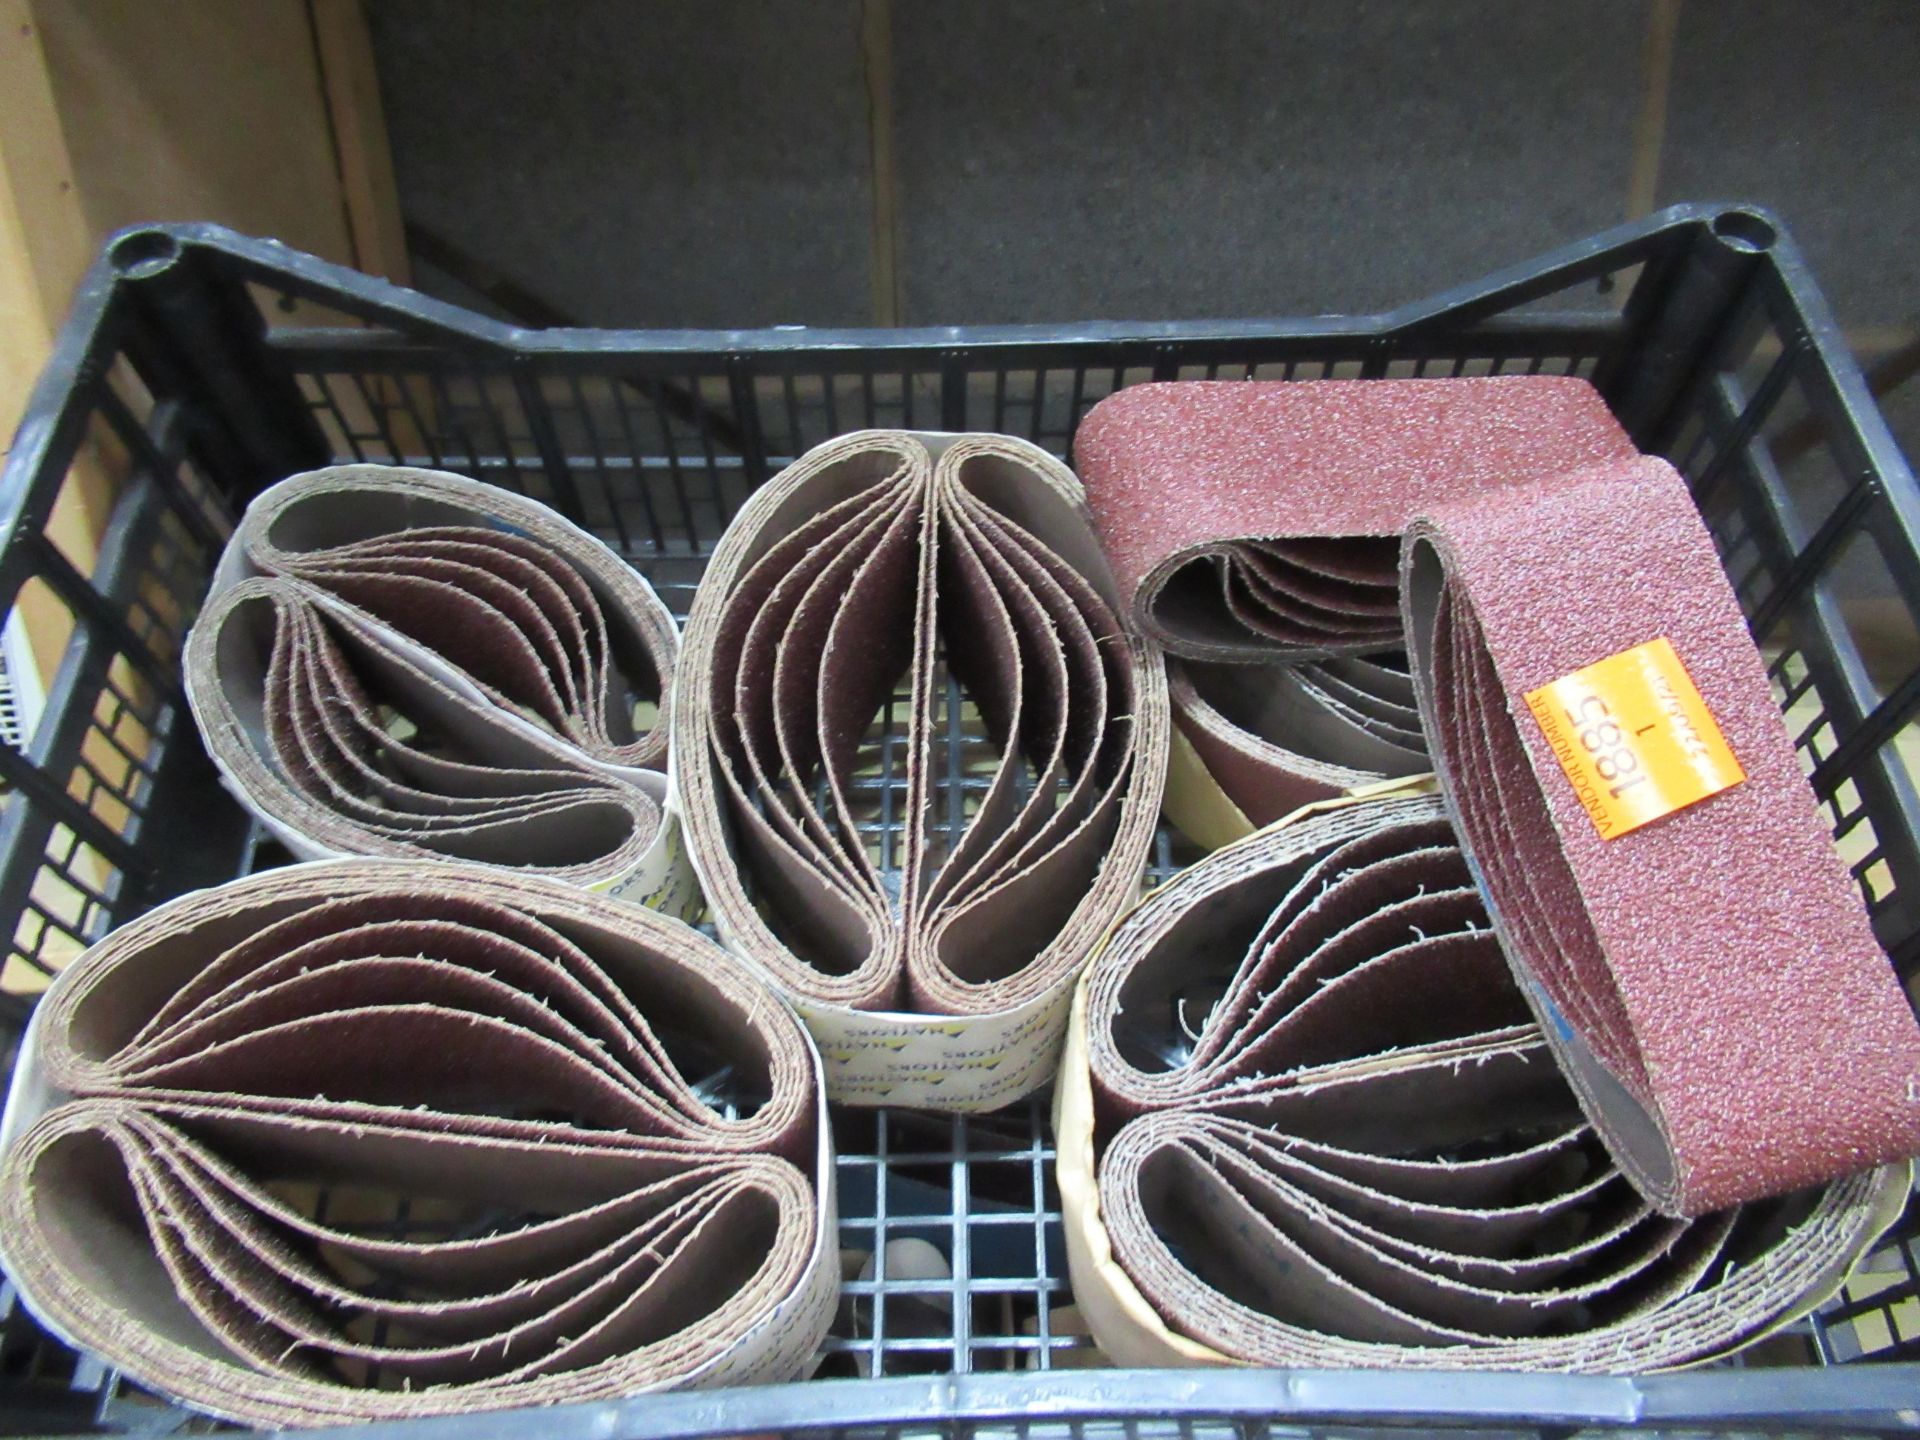 A Tray of various sanding belts